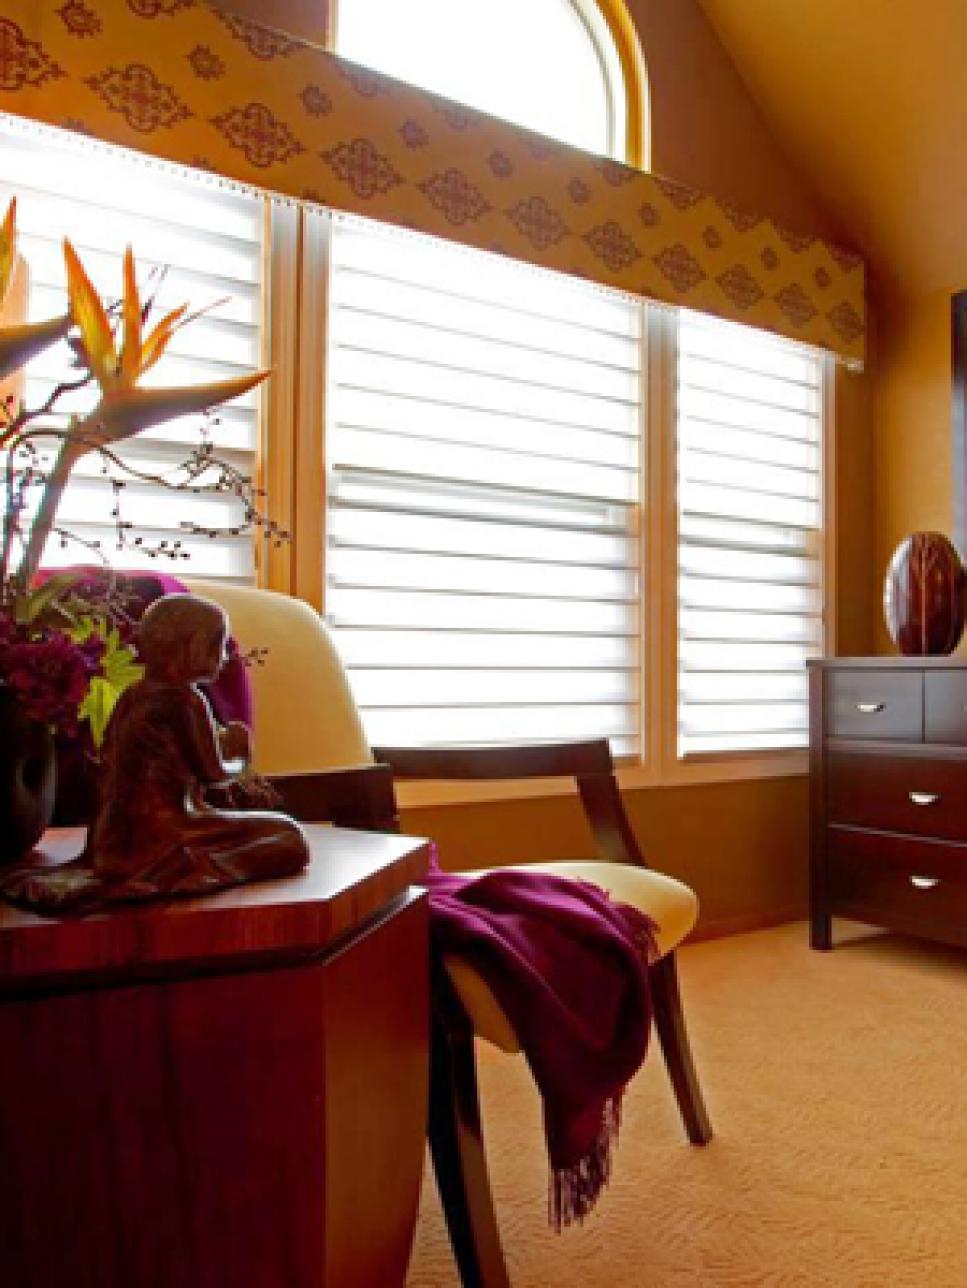 7 Beautiful Window Treatments for Bedrooms | HGTV